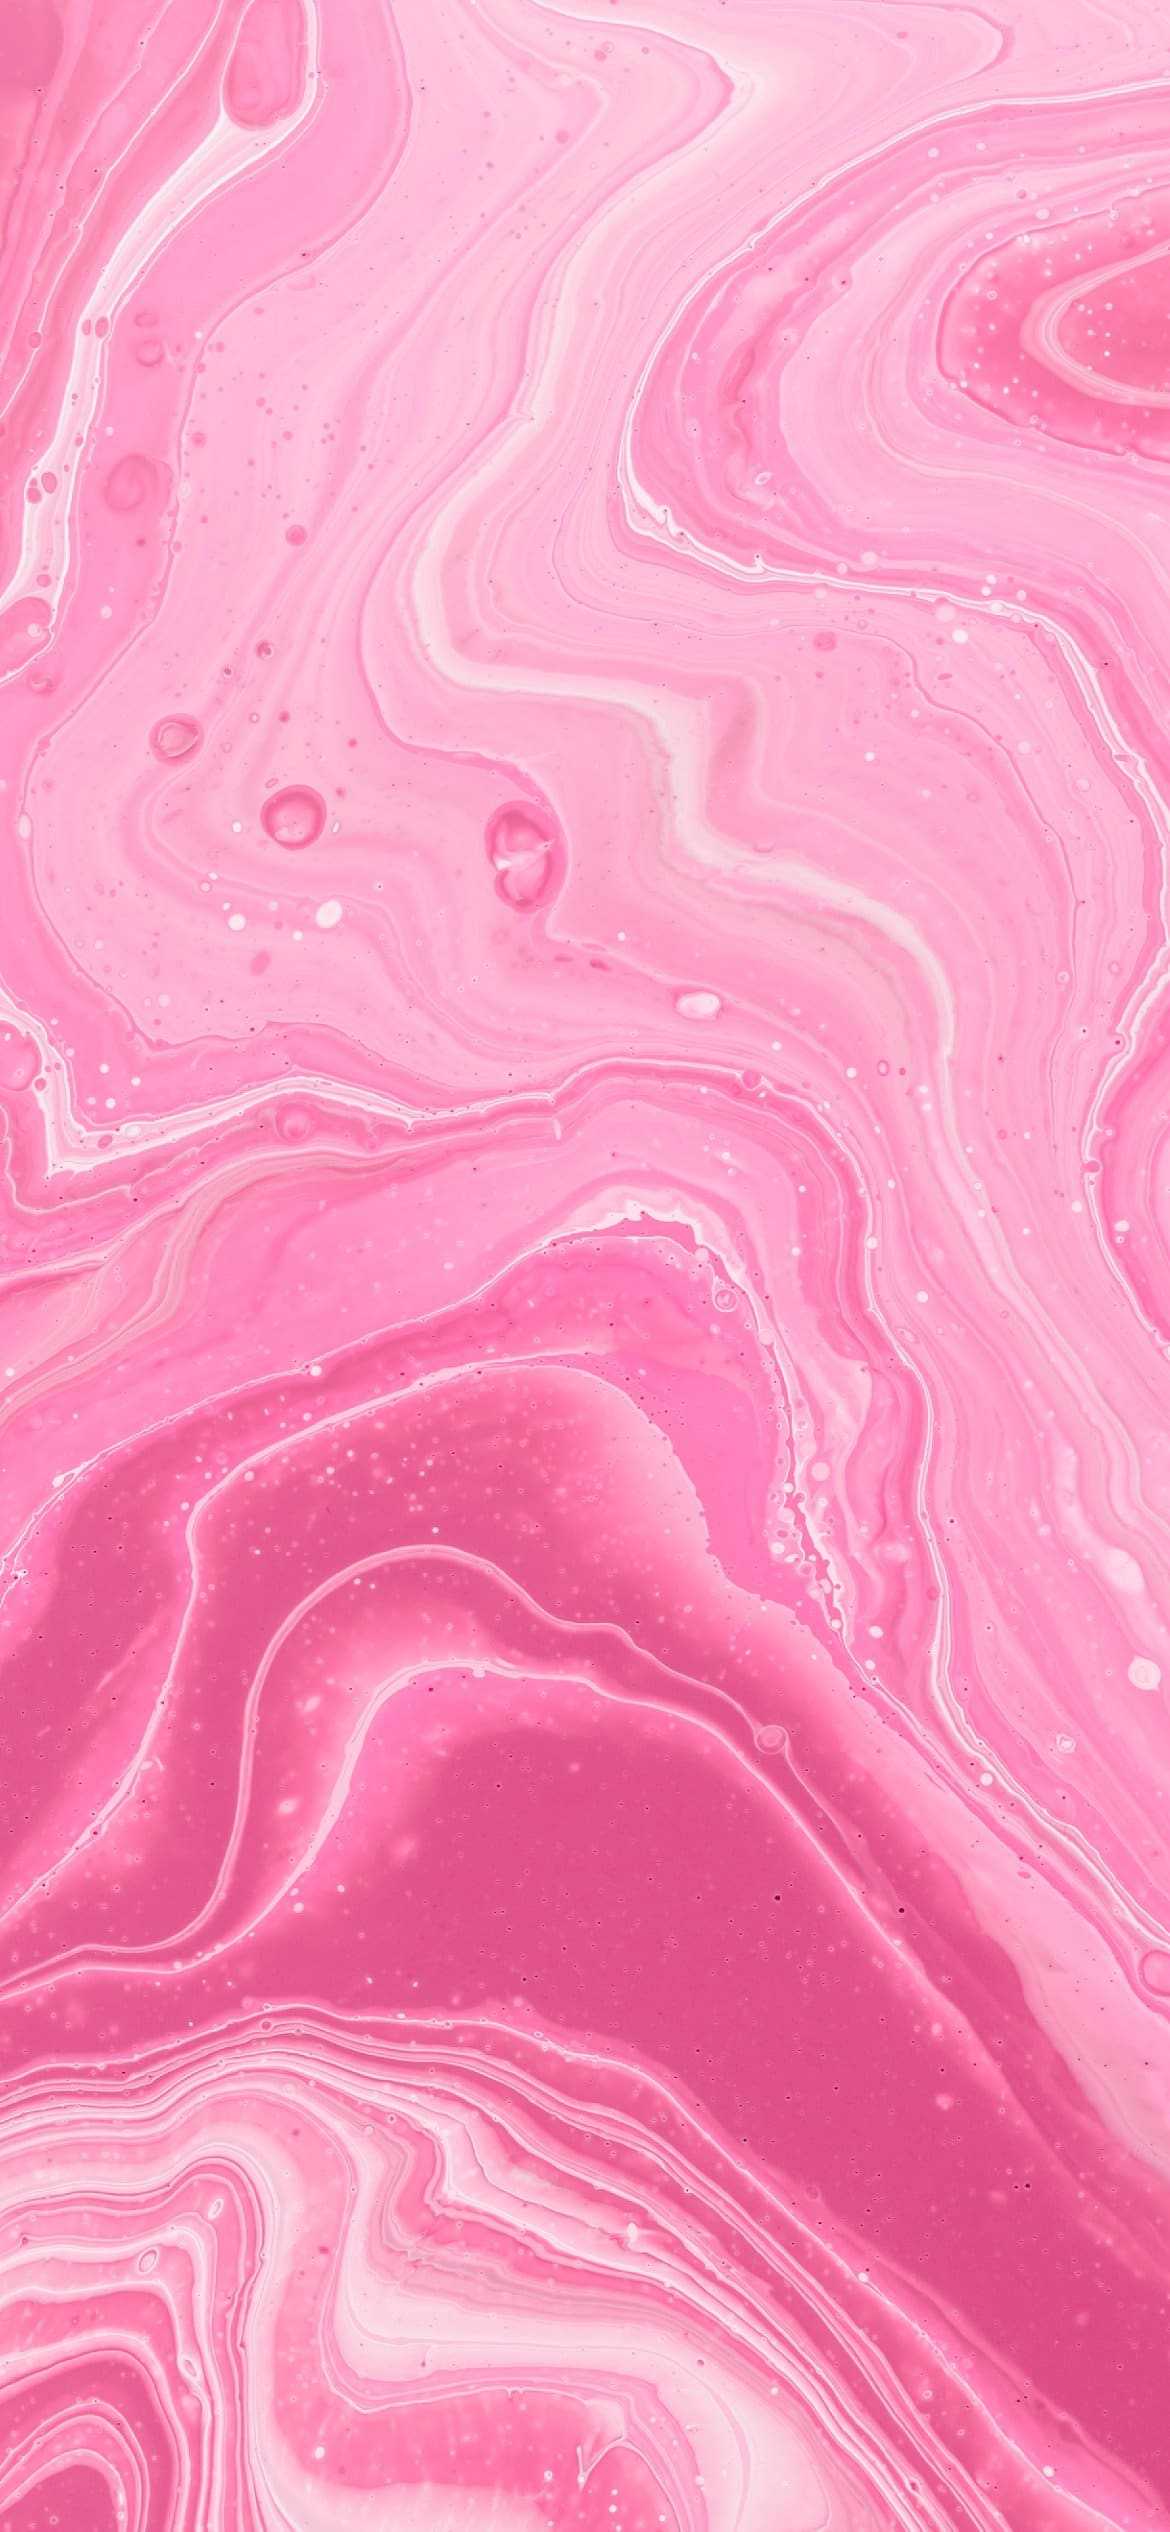 A pink marble texture with white lines - Pink, hot pink, pastel pink, neon pink, warm